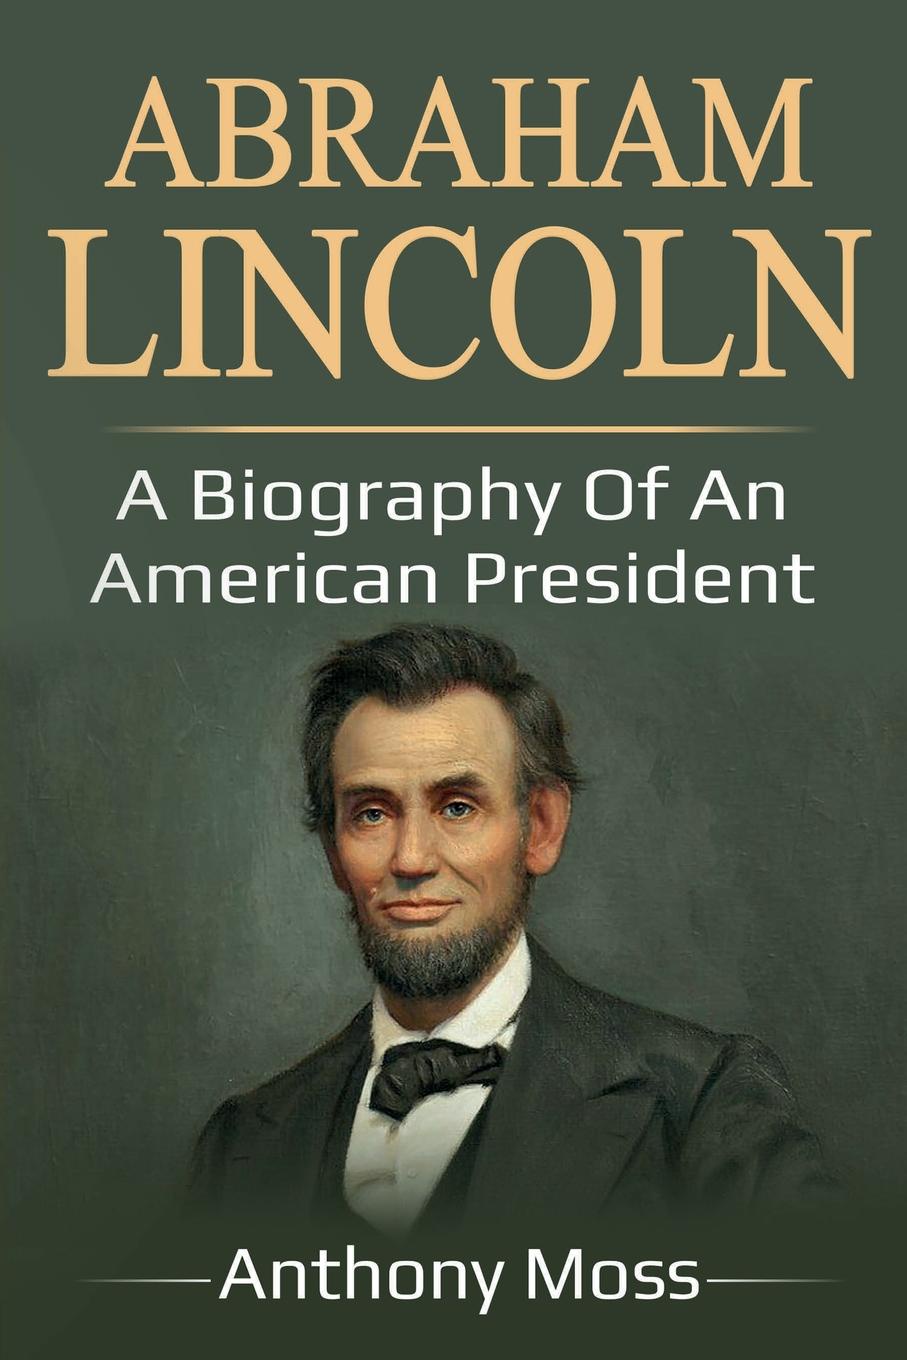 Abraham Lincoln. A biography of an American President